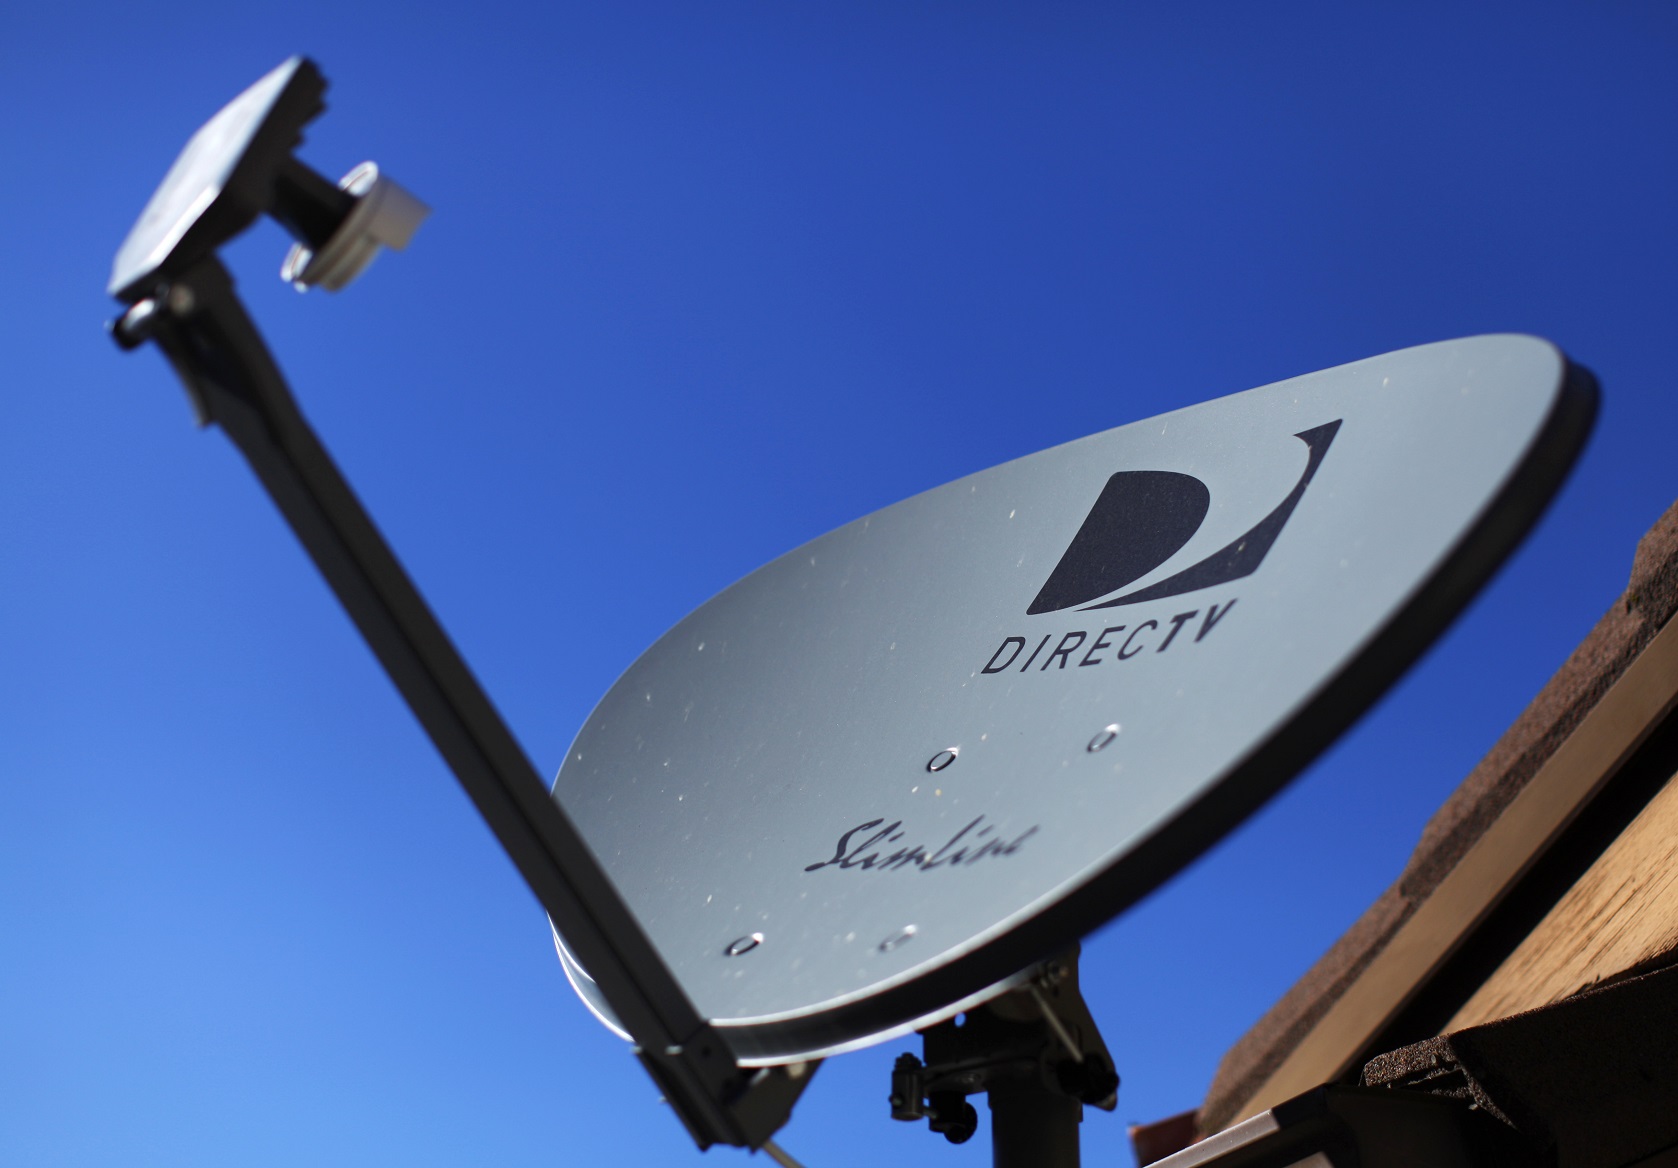 What Kind Of Service Do Directv And Dish Network Provide Television Viewers?